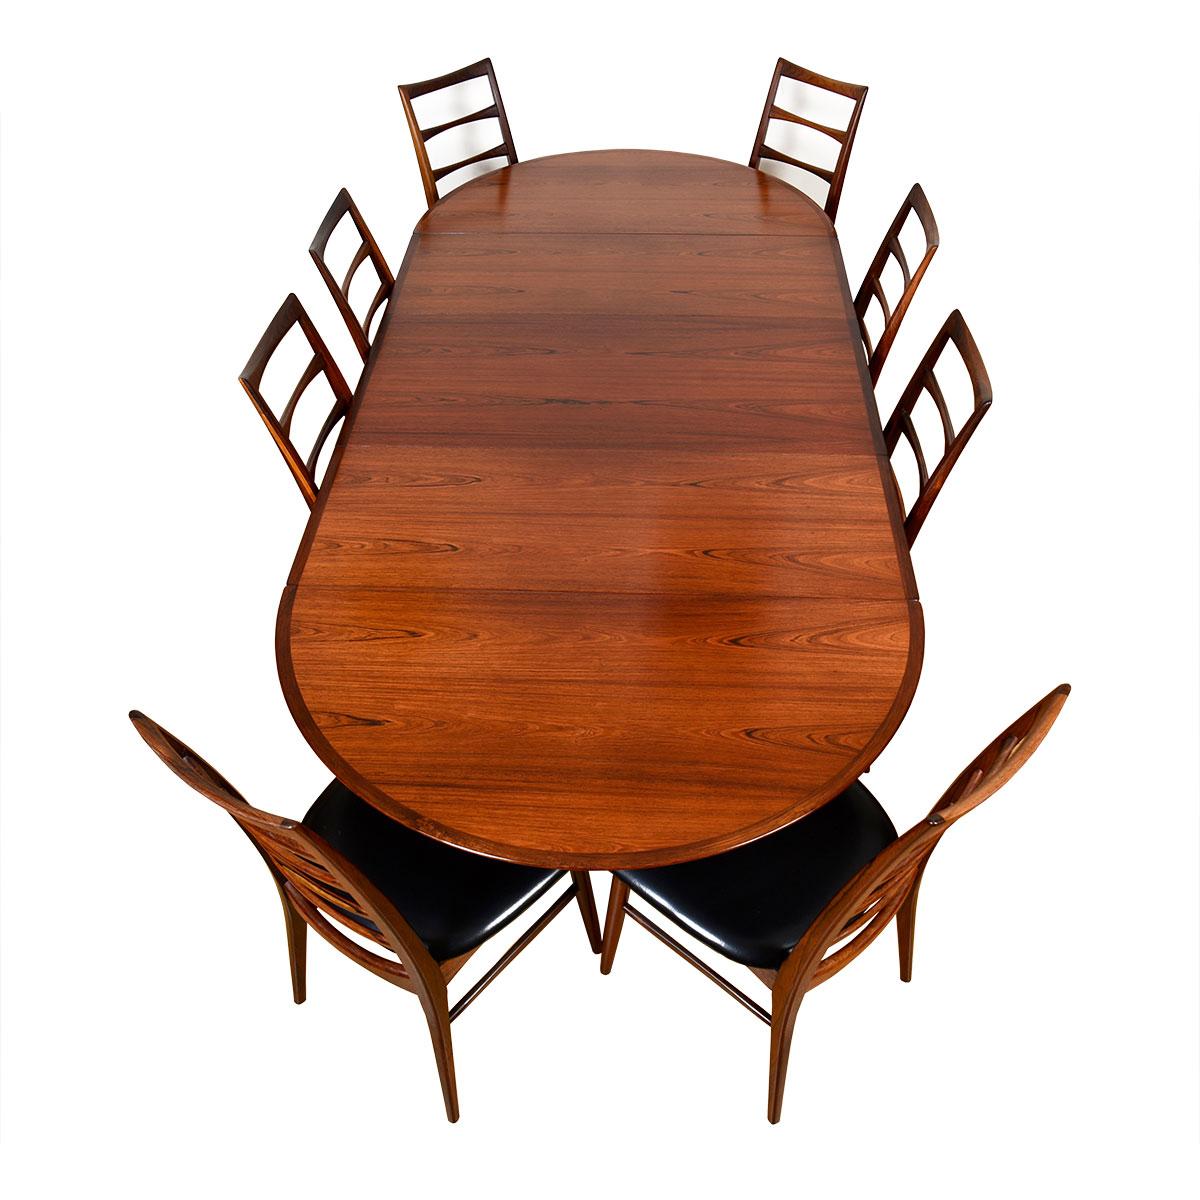 20th Century Vodder Danish Rosewood Dining Table with Removable Drop Leaves + Middle Leaf